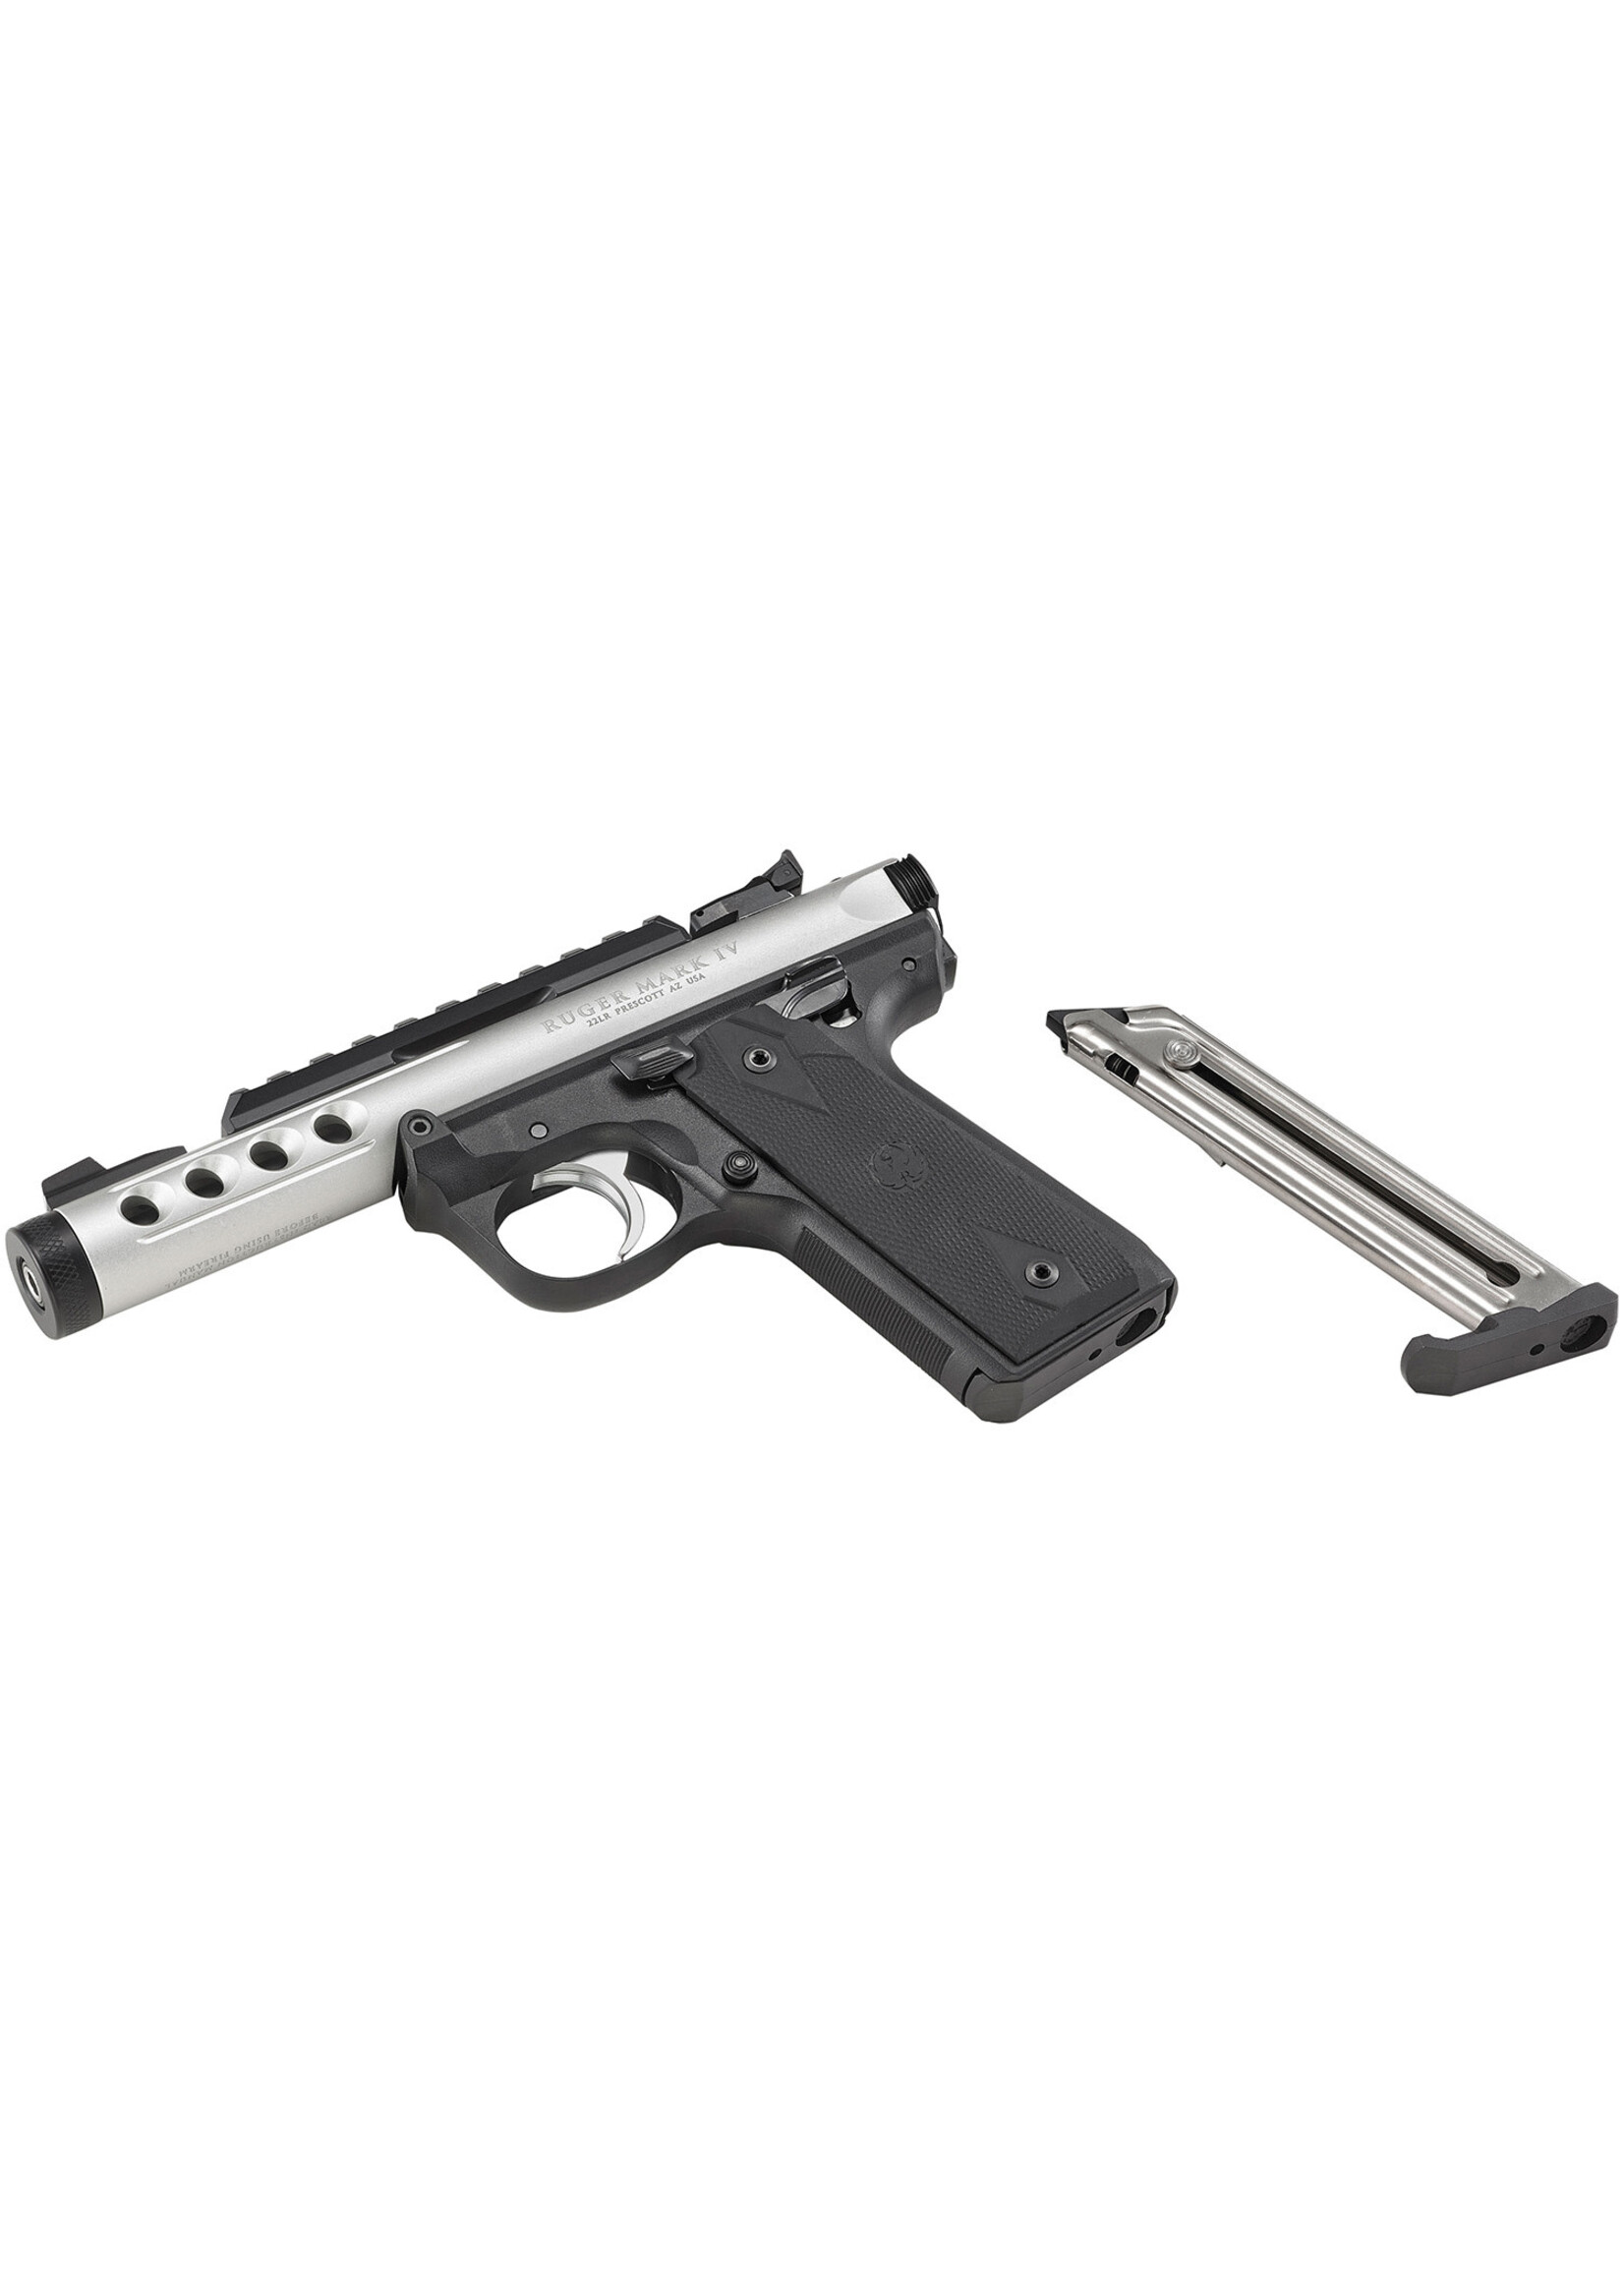 Ruger Ruger 43945 Mark IV 22/45 Lite 22 LR 10+1 4.40" Satin Stainless Steel/Threaded Barrel, Clear Anodized Aluminum Slide Black Black Polymer Ventilated Aluminum w/Picatinny Rail Receiver Checkered 1911-Style Panel Grip